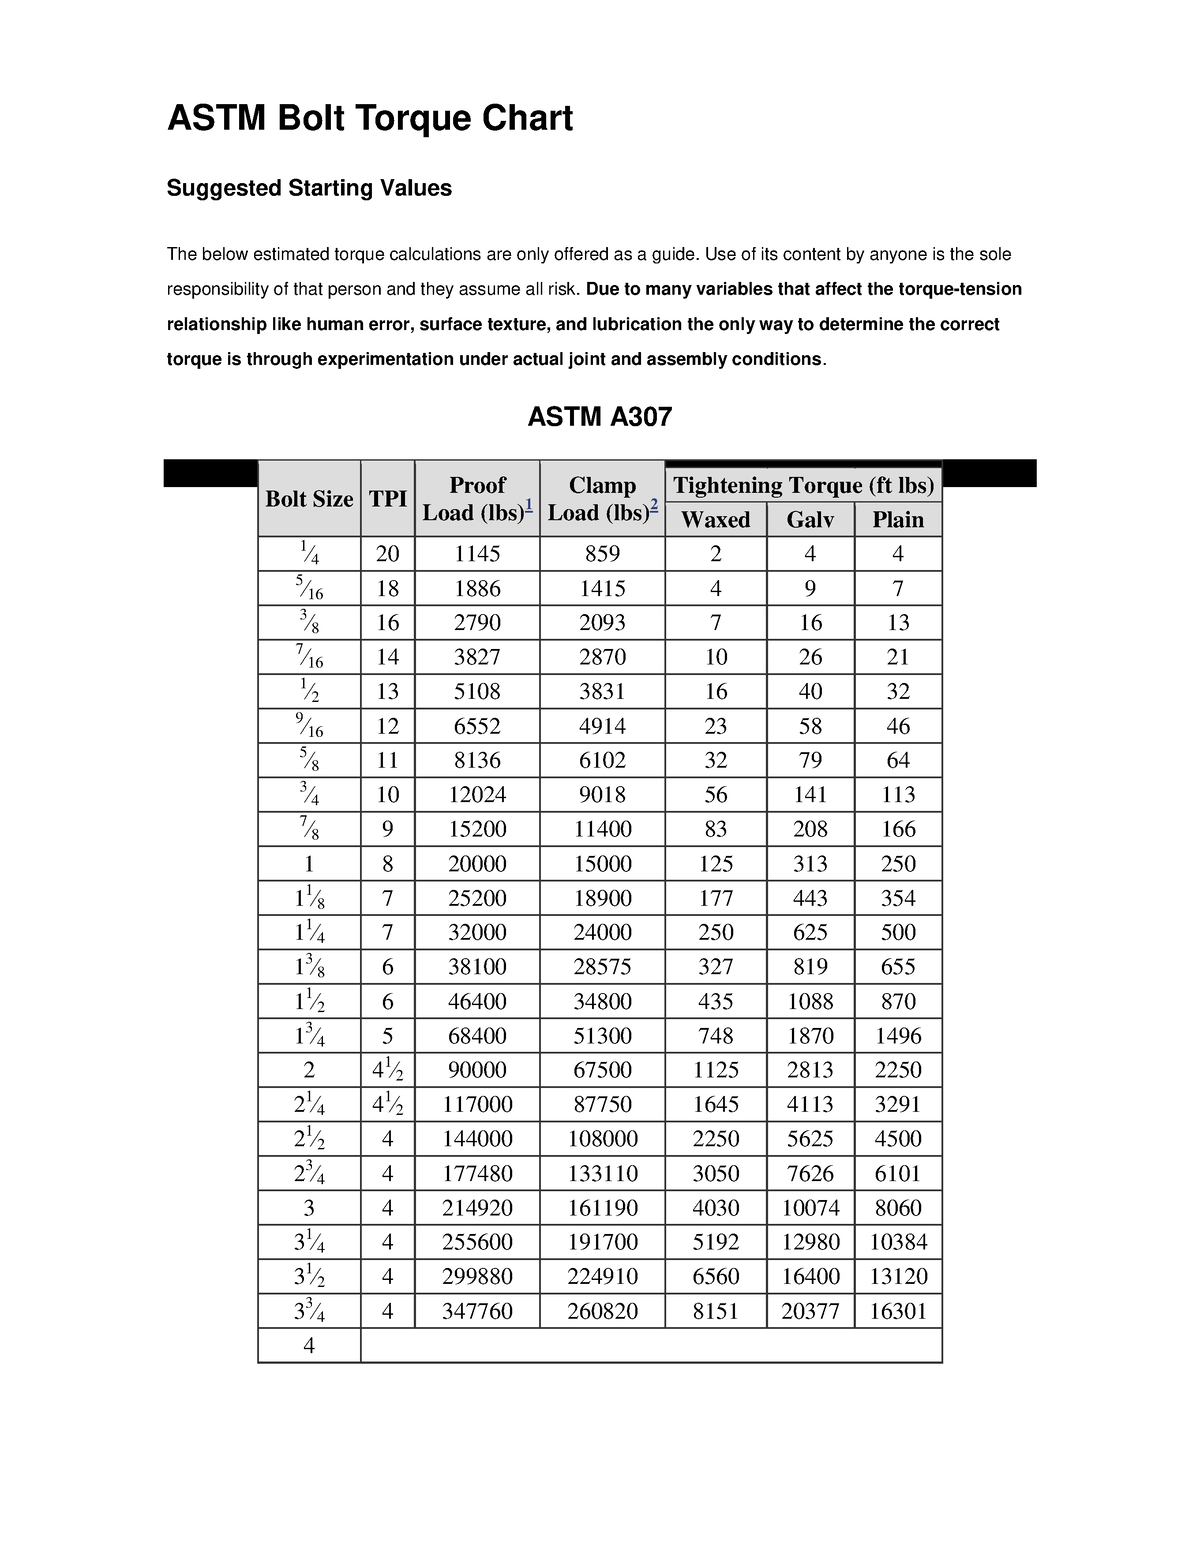 Astm Bolt Torque Chart For Inspection Astm Bolt Torque Chart Suggested Starting Values The 0572